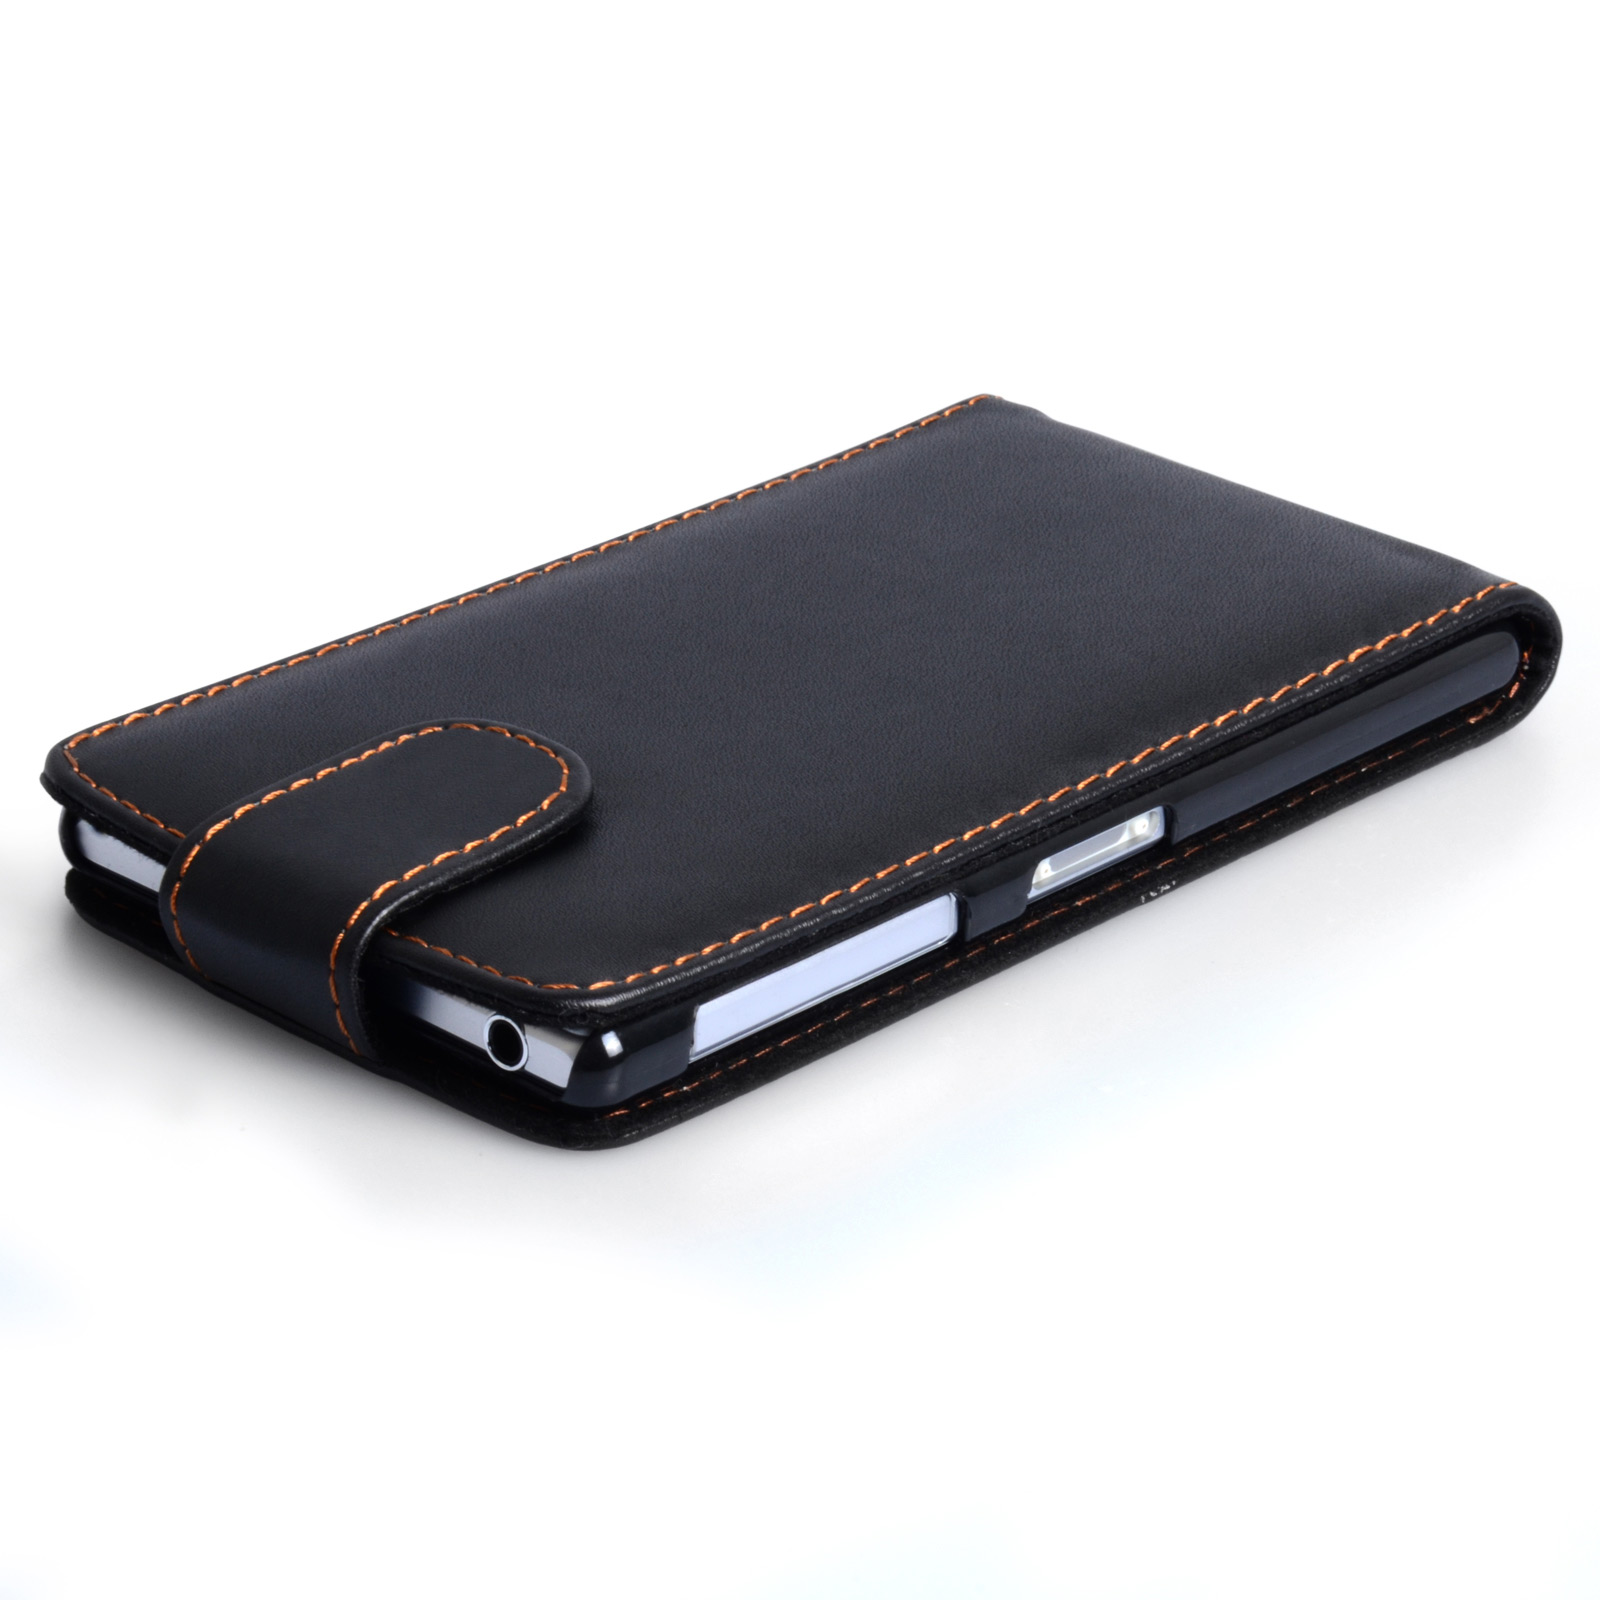 YouSave Accessories Sony Xperia Z2 Leather-Effect Flip Case - Black